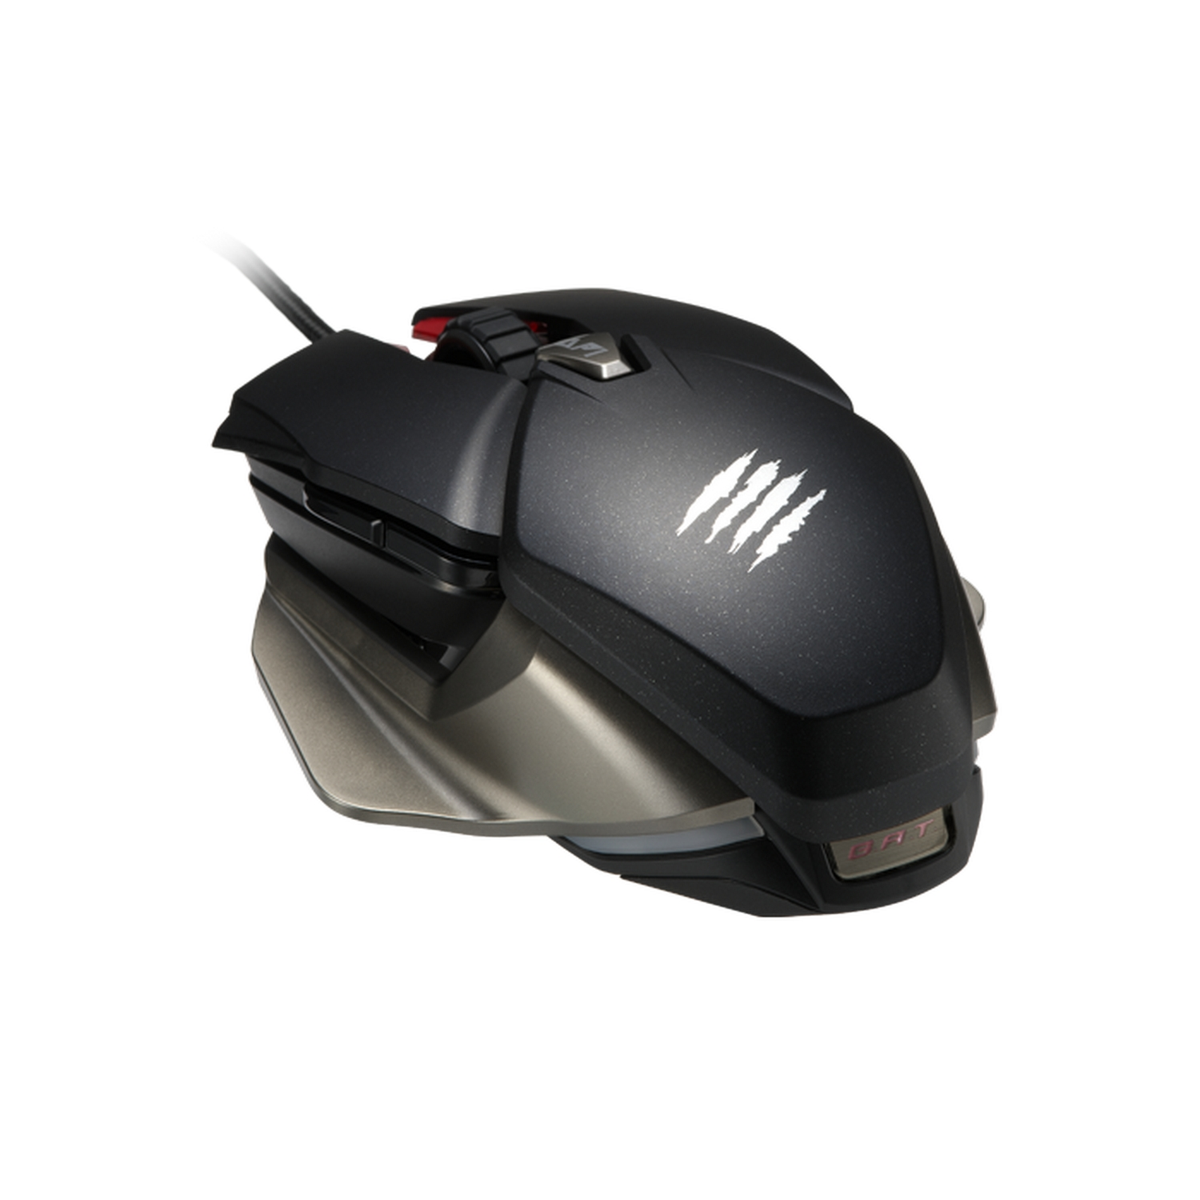 MAD Ambidextreous Gaming 6+ Mouse, Schwarz CATZ Performance Gaming Black Mouse, B.A.T.